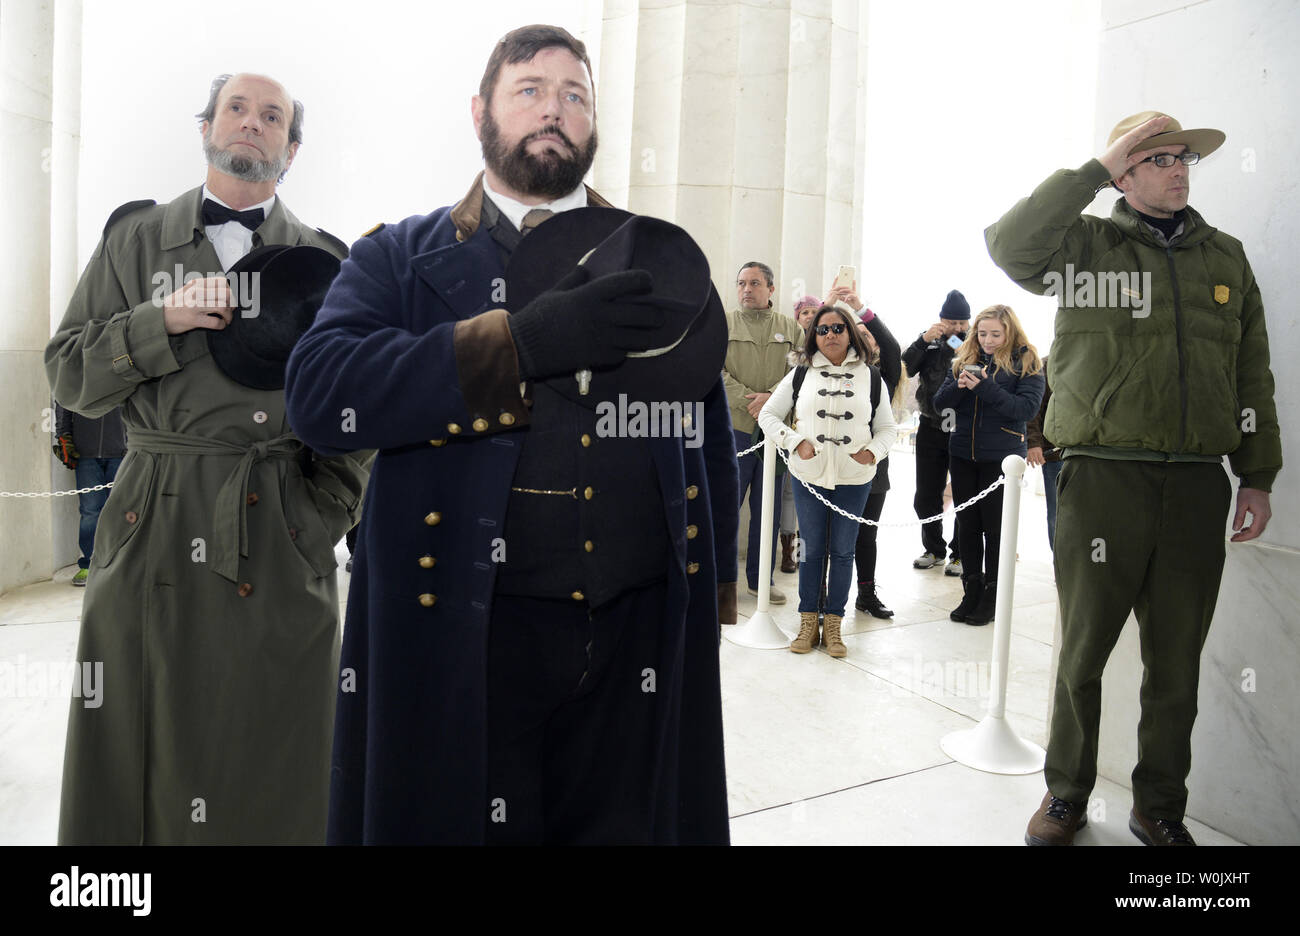 US President Abraham Lincoln re-enactor Greg Edwards (L) and Gen. Ulysses S. Grant re-enactor Kenneth Serfass pause during the Pledge of Allegiance during a National Park Service-hosted event to mark the 209th anniversary of Lincoln's birthday, February 12, 2018, at the Lincoln Memorial, in Washington, D.C. Considered one of America's greatest presidents, Lincoln is remembered for preserving the Union after the Civil War and freeing slaves with the Emancipation Proclamation.       Photo by Mike Theiler/UPI Stock Photo